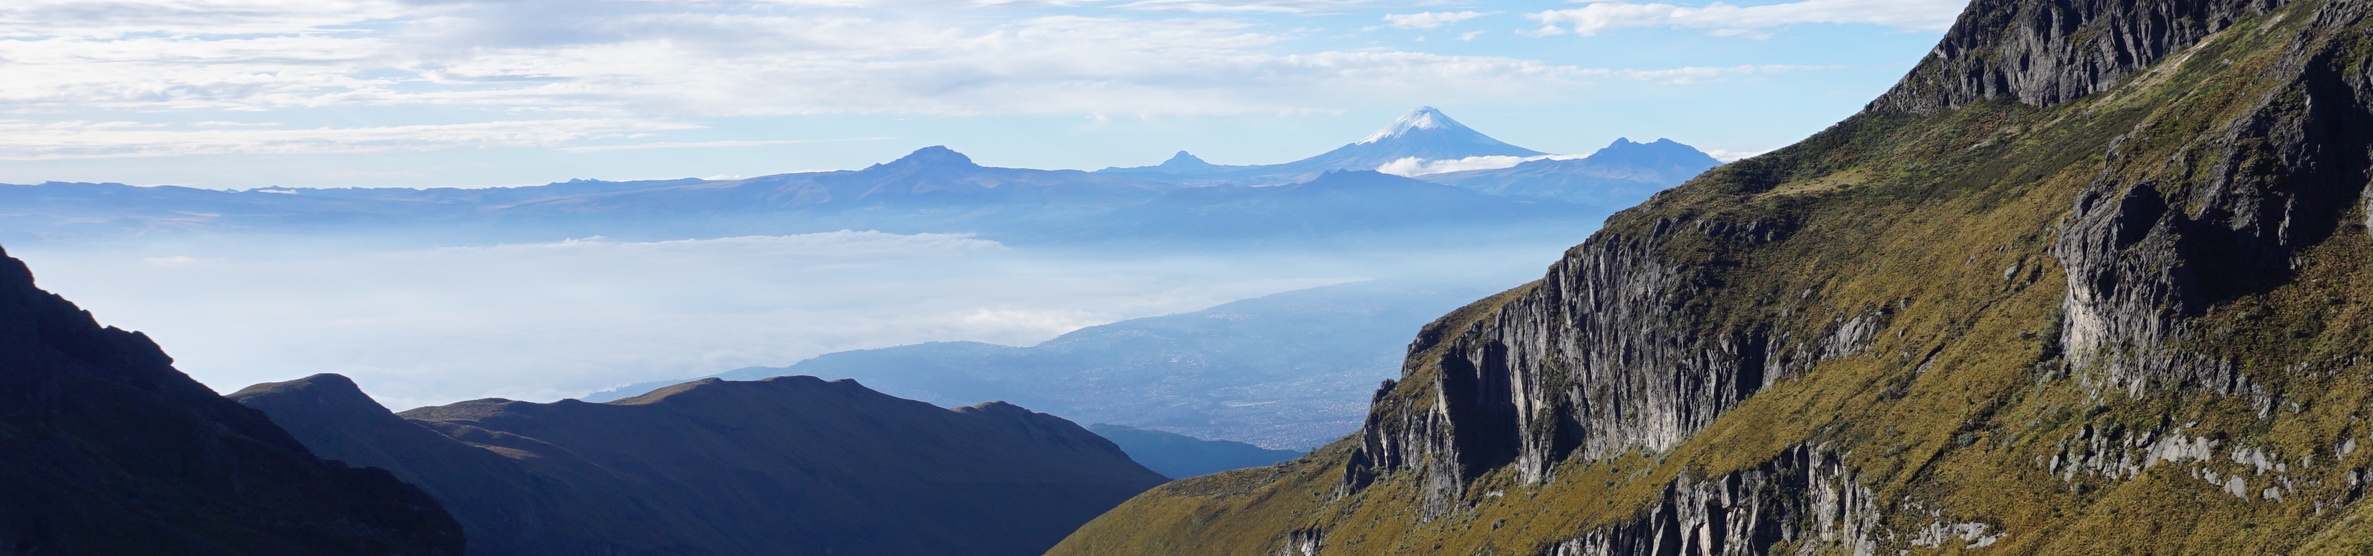 A short, wide photograph looking towards the horizon from a high vantage point on the slopes of Pichincha volcano. In the distance, the snowy cone of Antisana volcano is visible, and in the foreground are grassy cliffs.